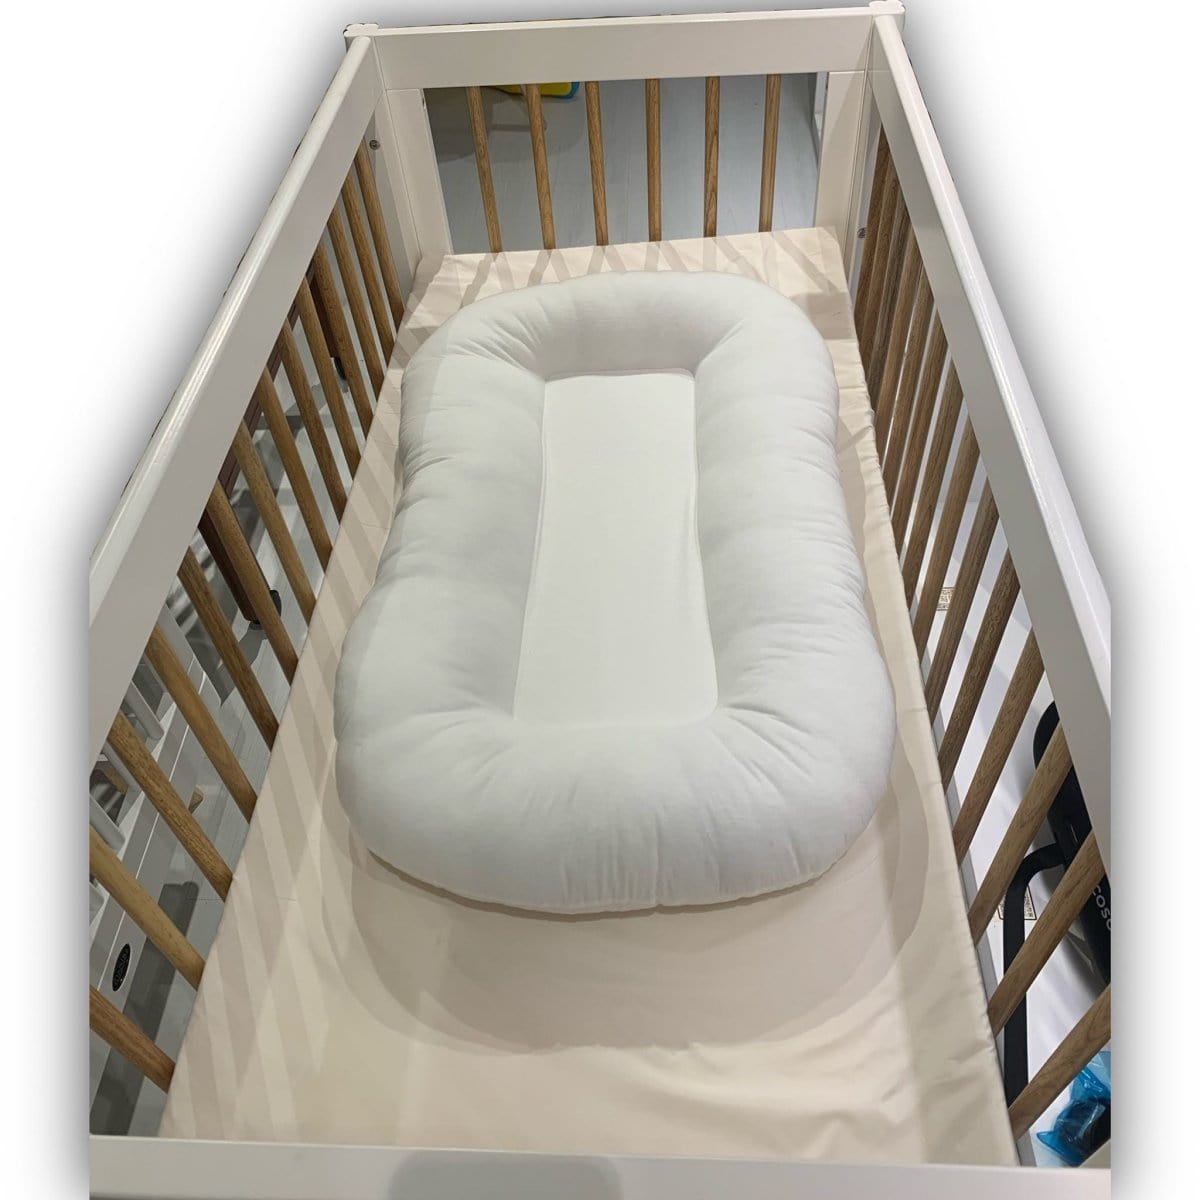 Copy of #1 Cheeky Bon Bon Baby Comfort Cocoon (CK830) picket and rail